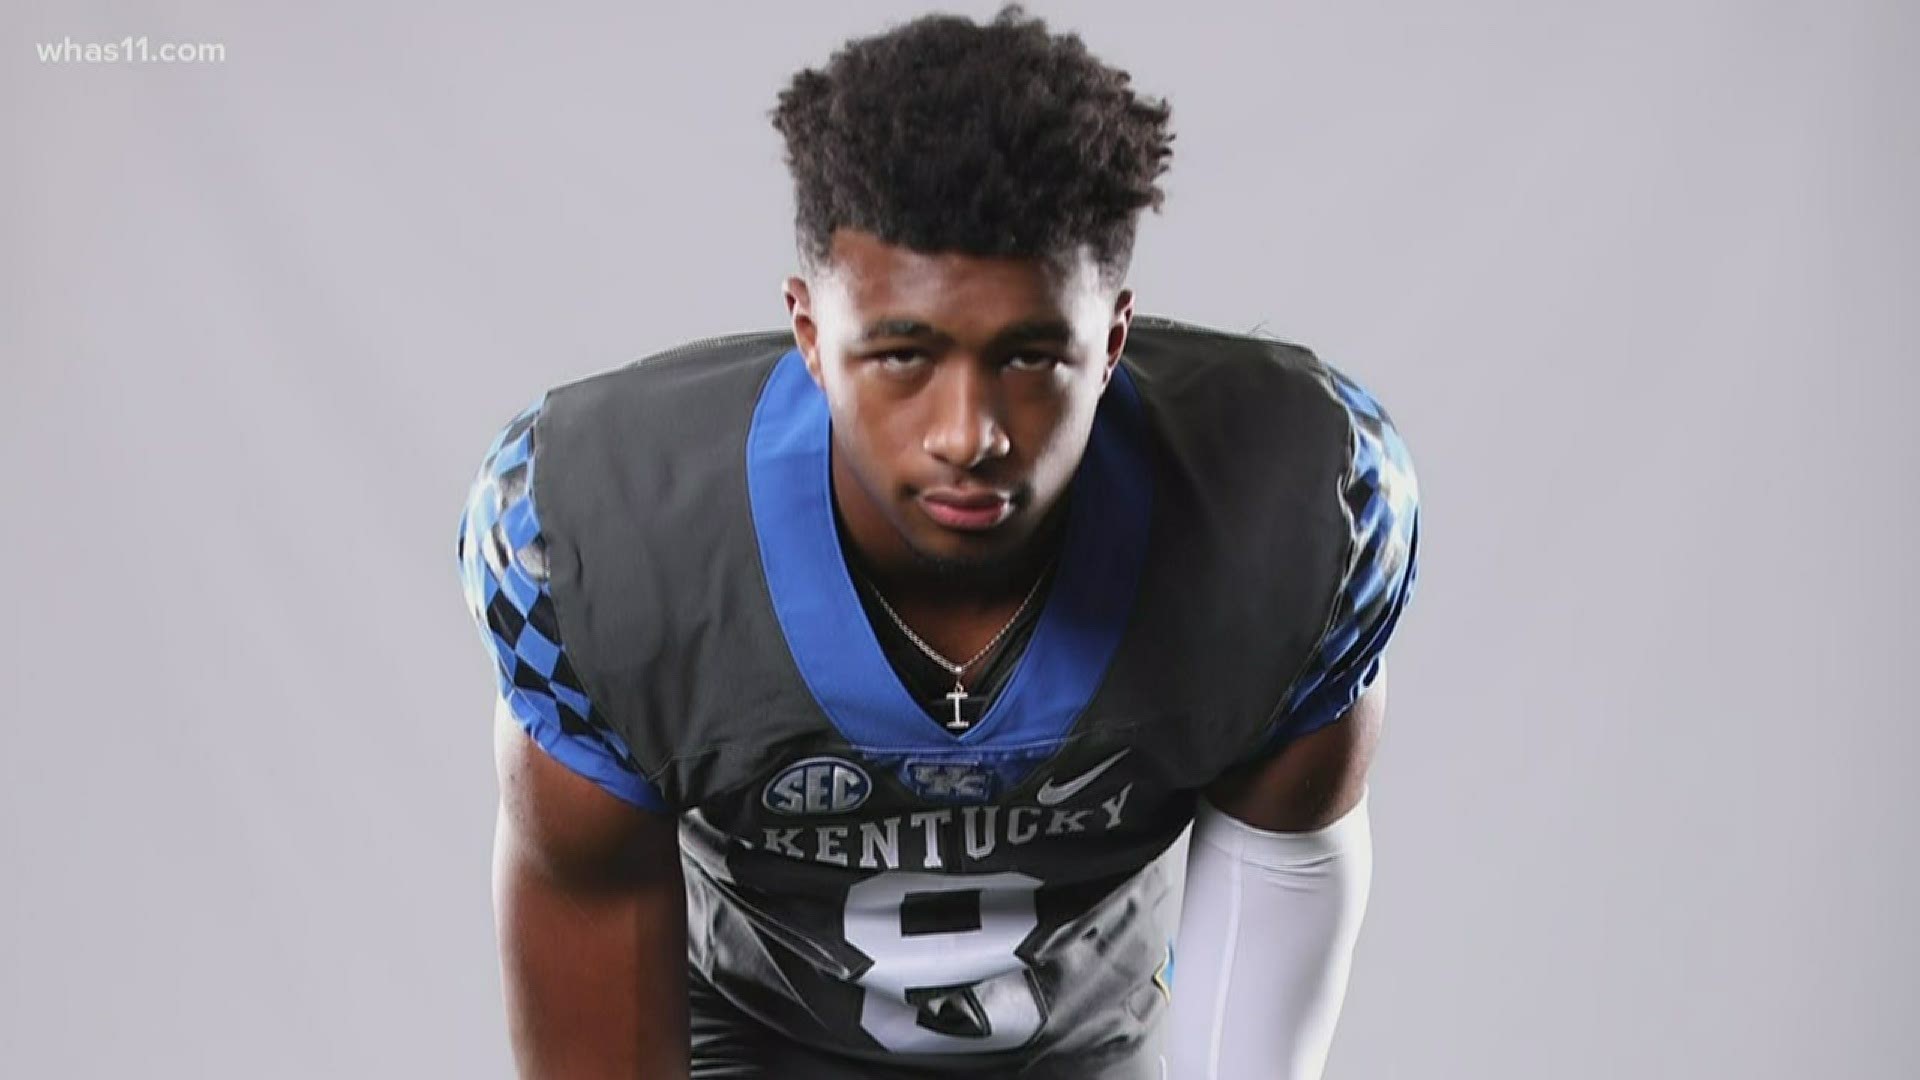 The Male standout signed with Kentucky football after growing up a devout Louisville fan.